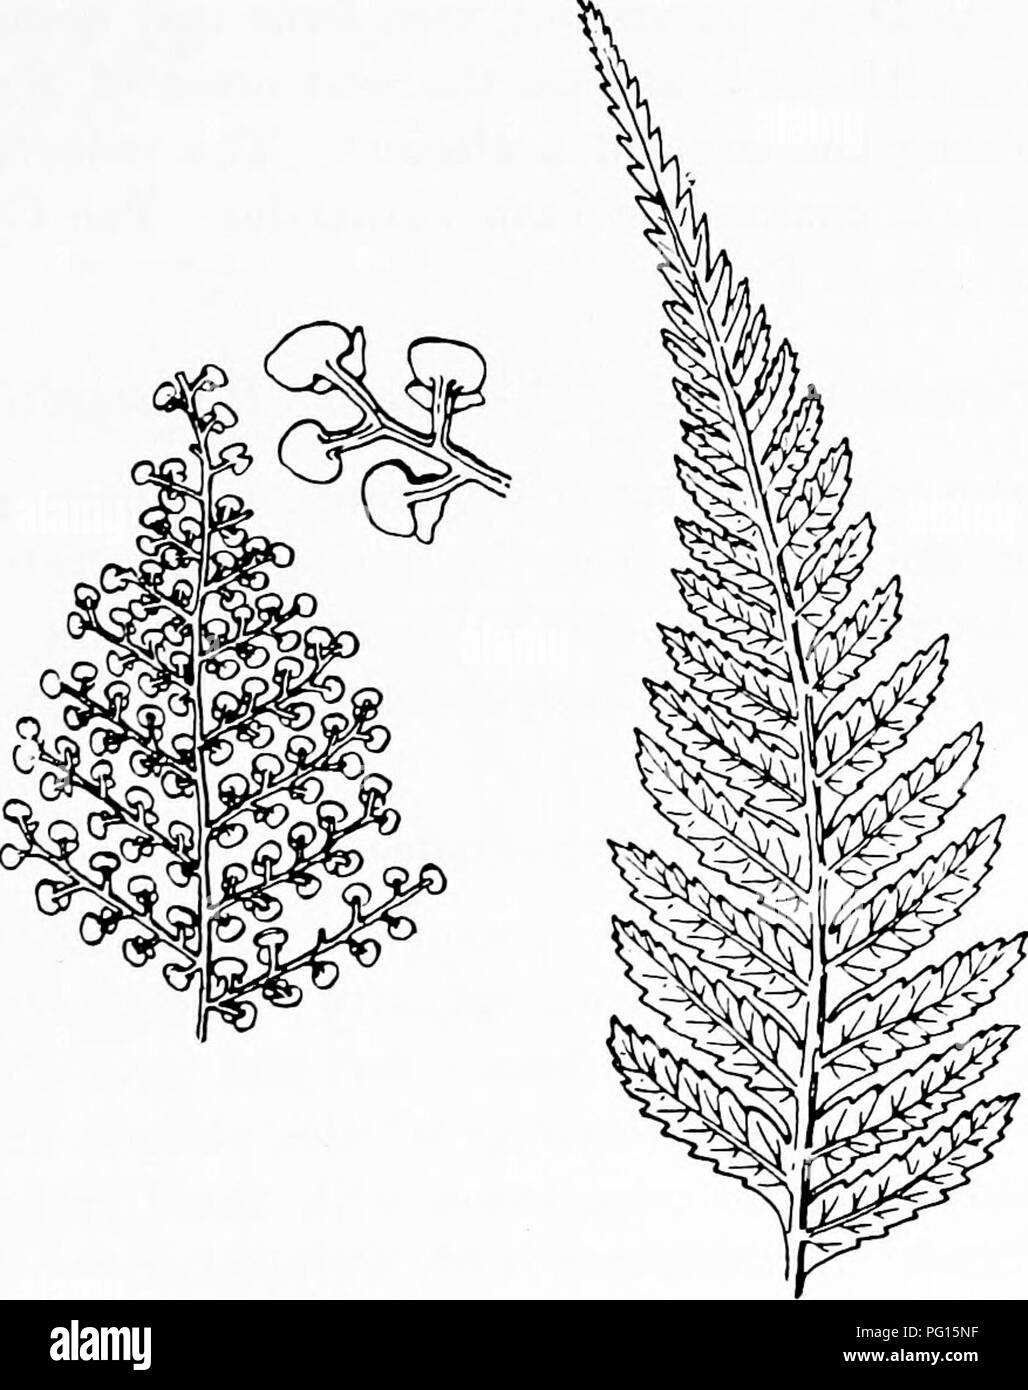 . Fossil plants : for students of botany and geology . Paleobotany. XX] CYATHEACEAE 295 pound, but Gyathea sinnata Hook, a rare Ceylon species, bears simple narrow linear leaves. This family includes, with few exceptions, all the tree ferns ^. The sori of Dicksonia are enclosed in a two-valved indusium (fig. 229, F, G); in the species represented in fig. 230 the fertile segments, which terminate in cup-like indusia, are characterised by the absence of a lamina and closely resemble those of Thyrsopteris (fig. 229, A).. Fio. 230. Dicksonia Bertercana Hook. Fertile aud sterile pinnae. (Nat. size. Stock Photo